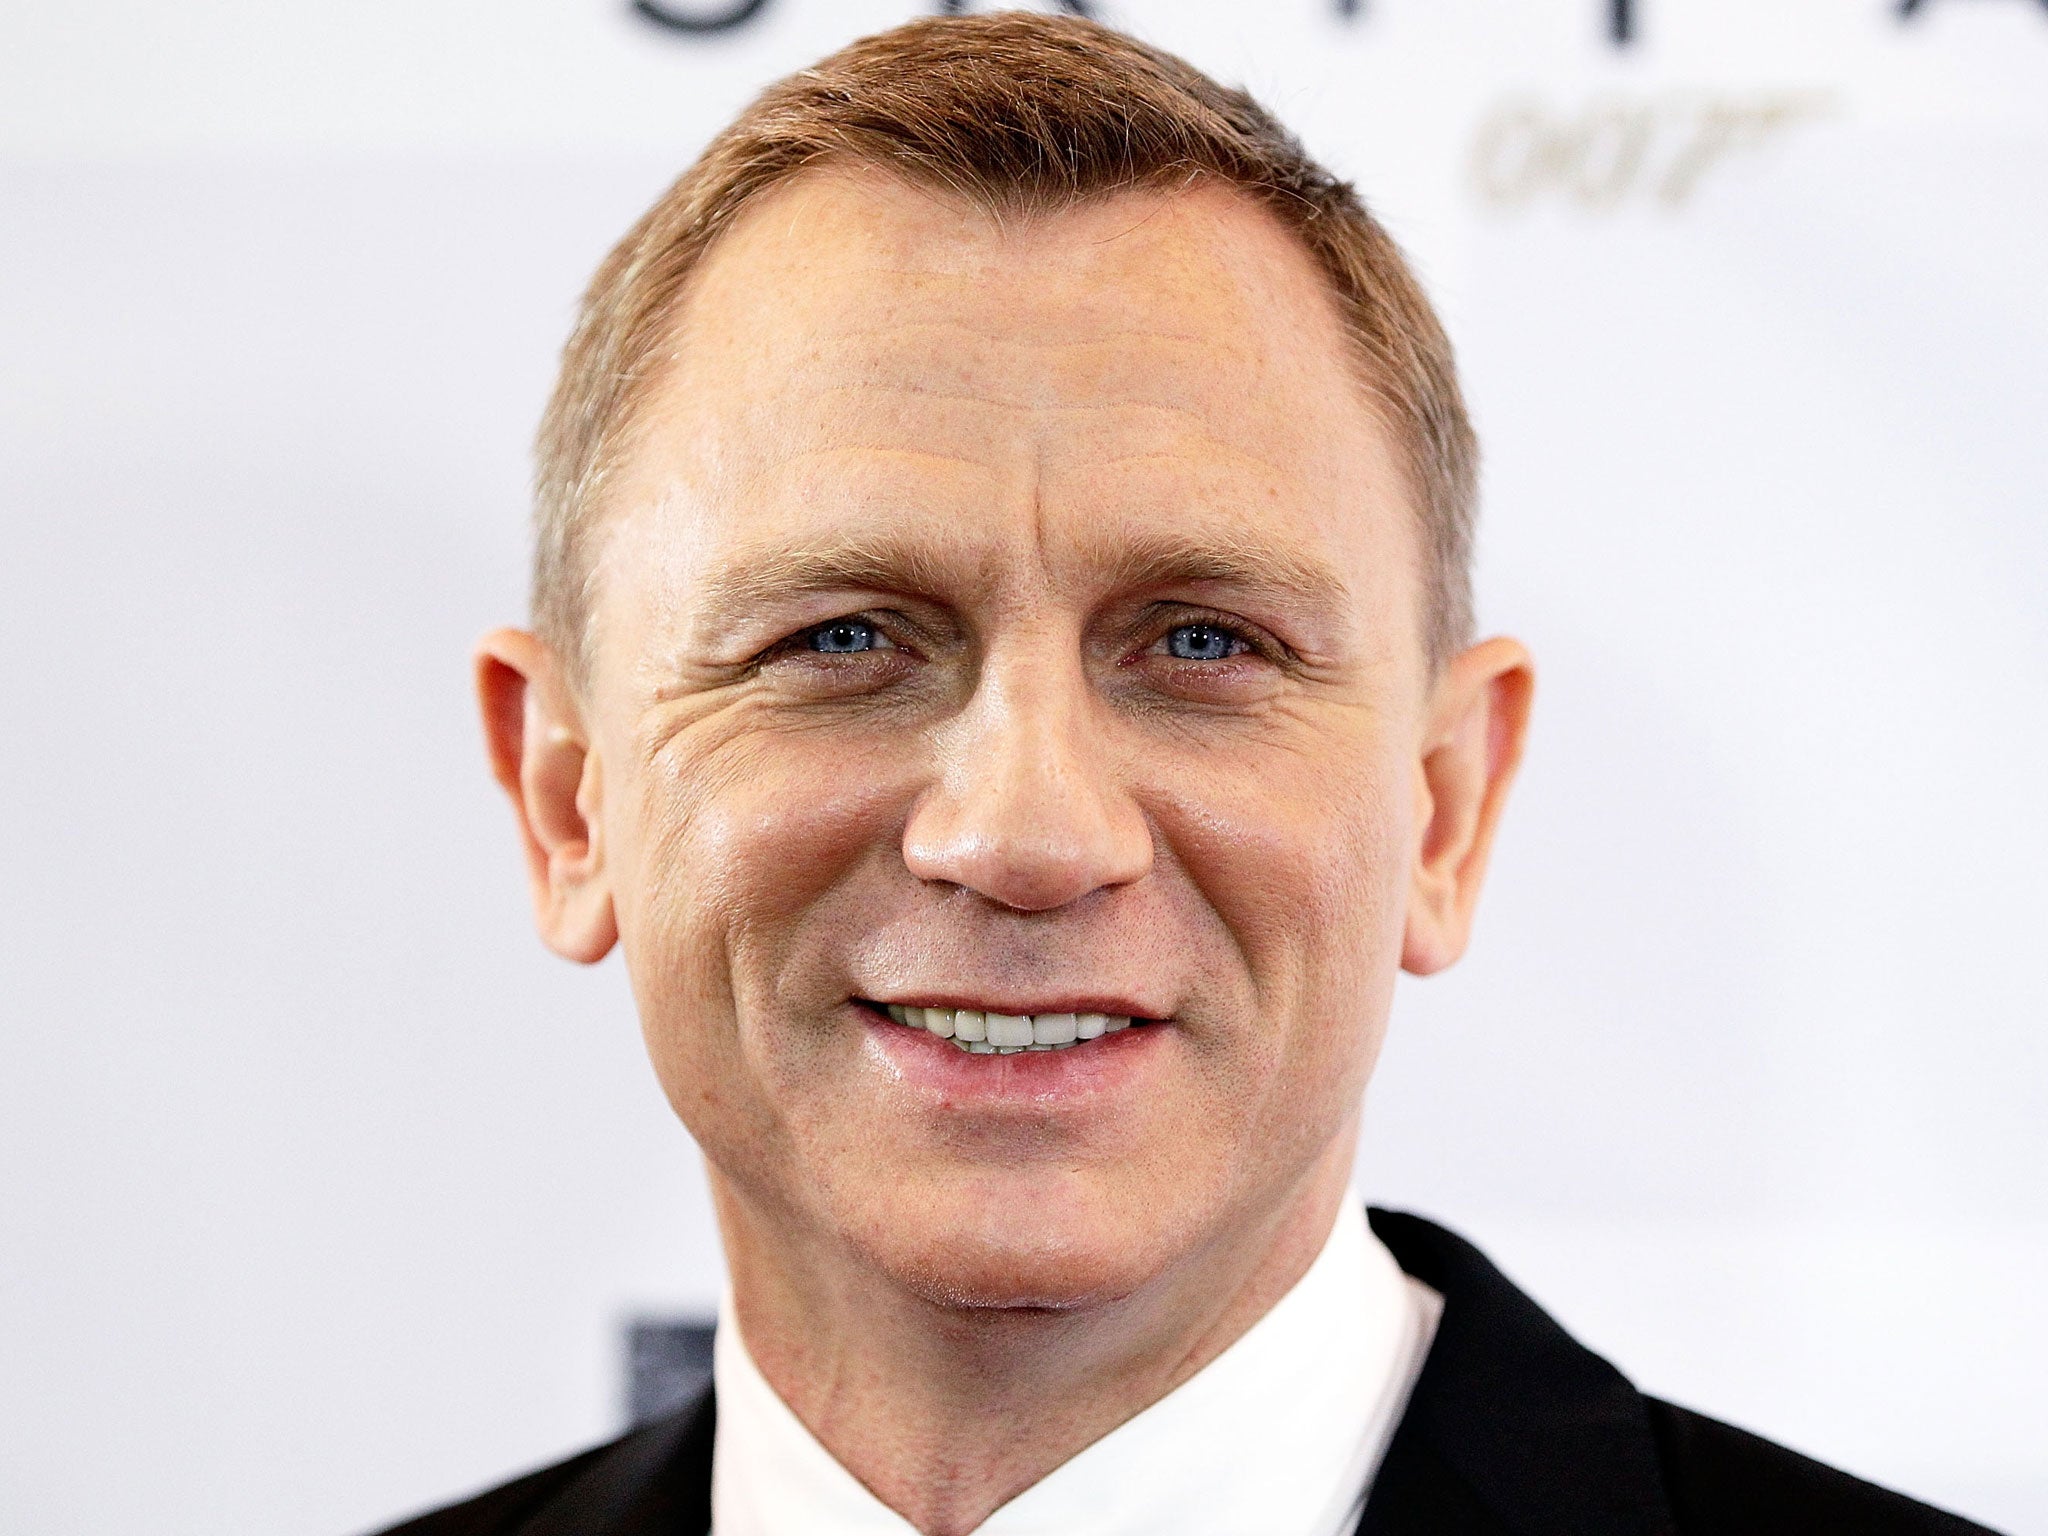 James Bond star Daniel Craig has dropped out of Courtney Hunt's forthcoming courtroom thriller, The Whole Truth